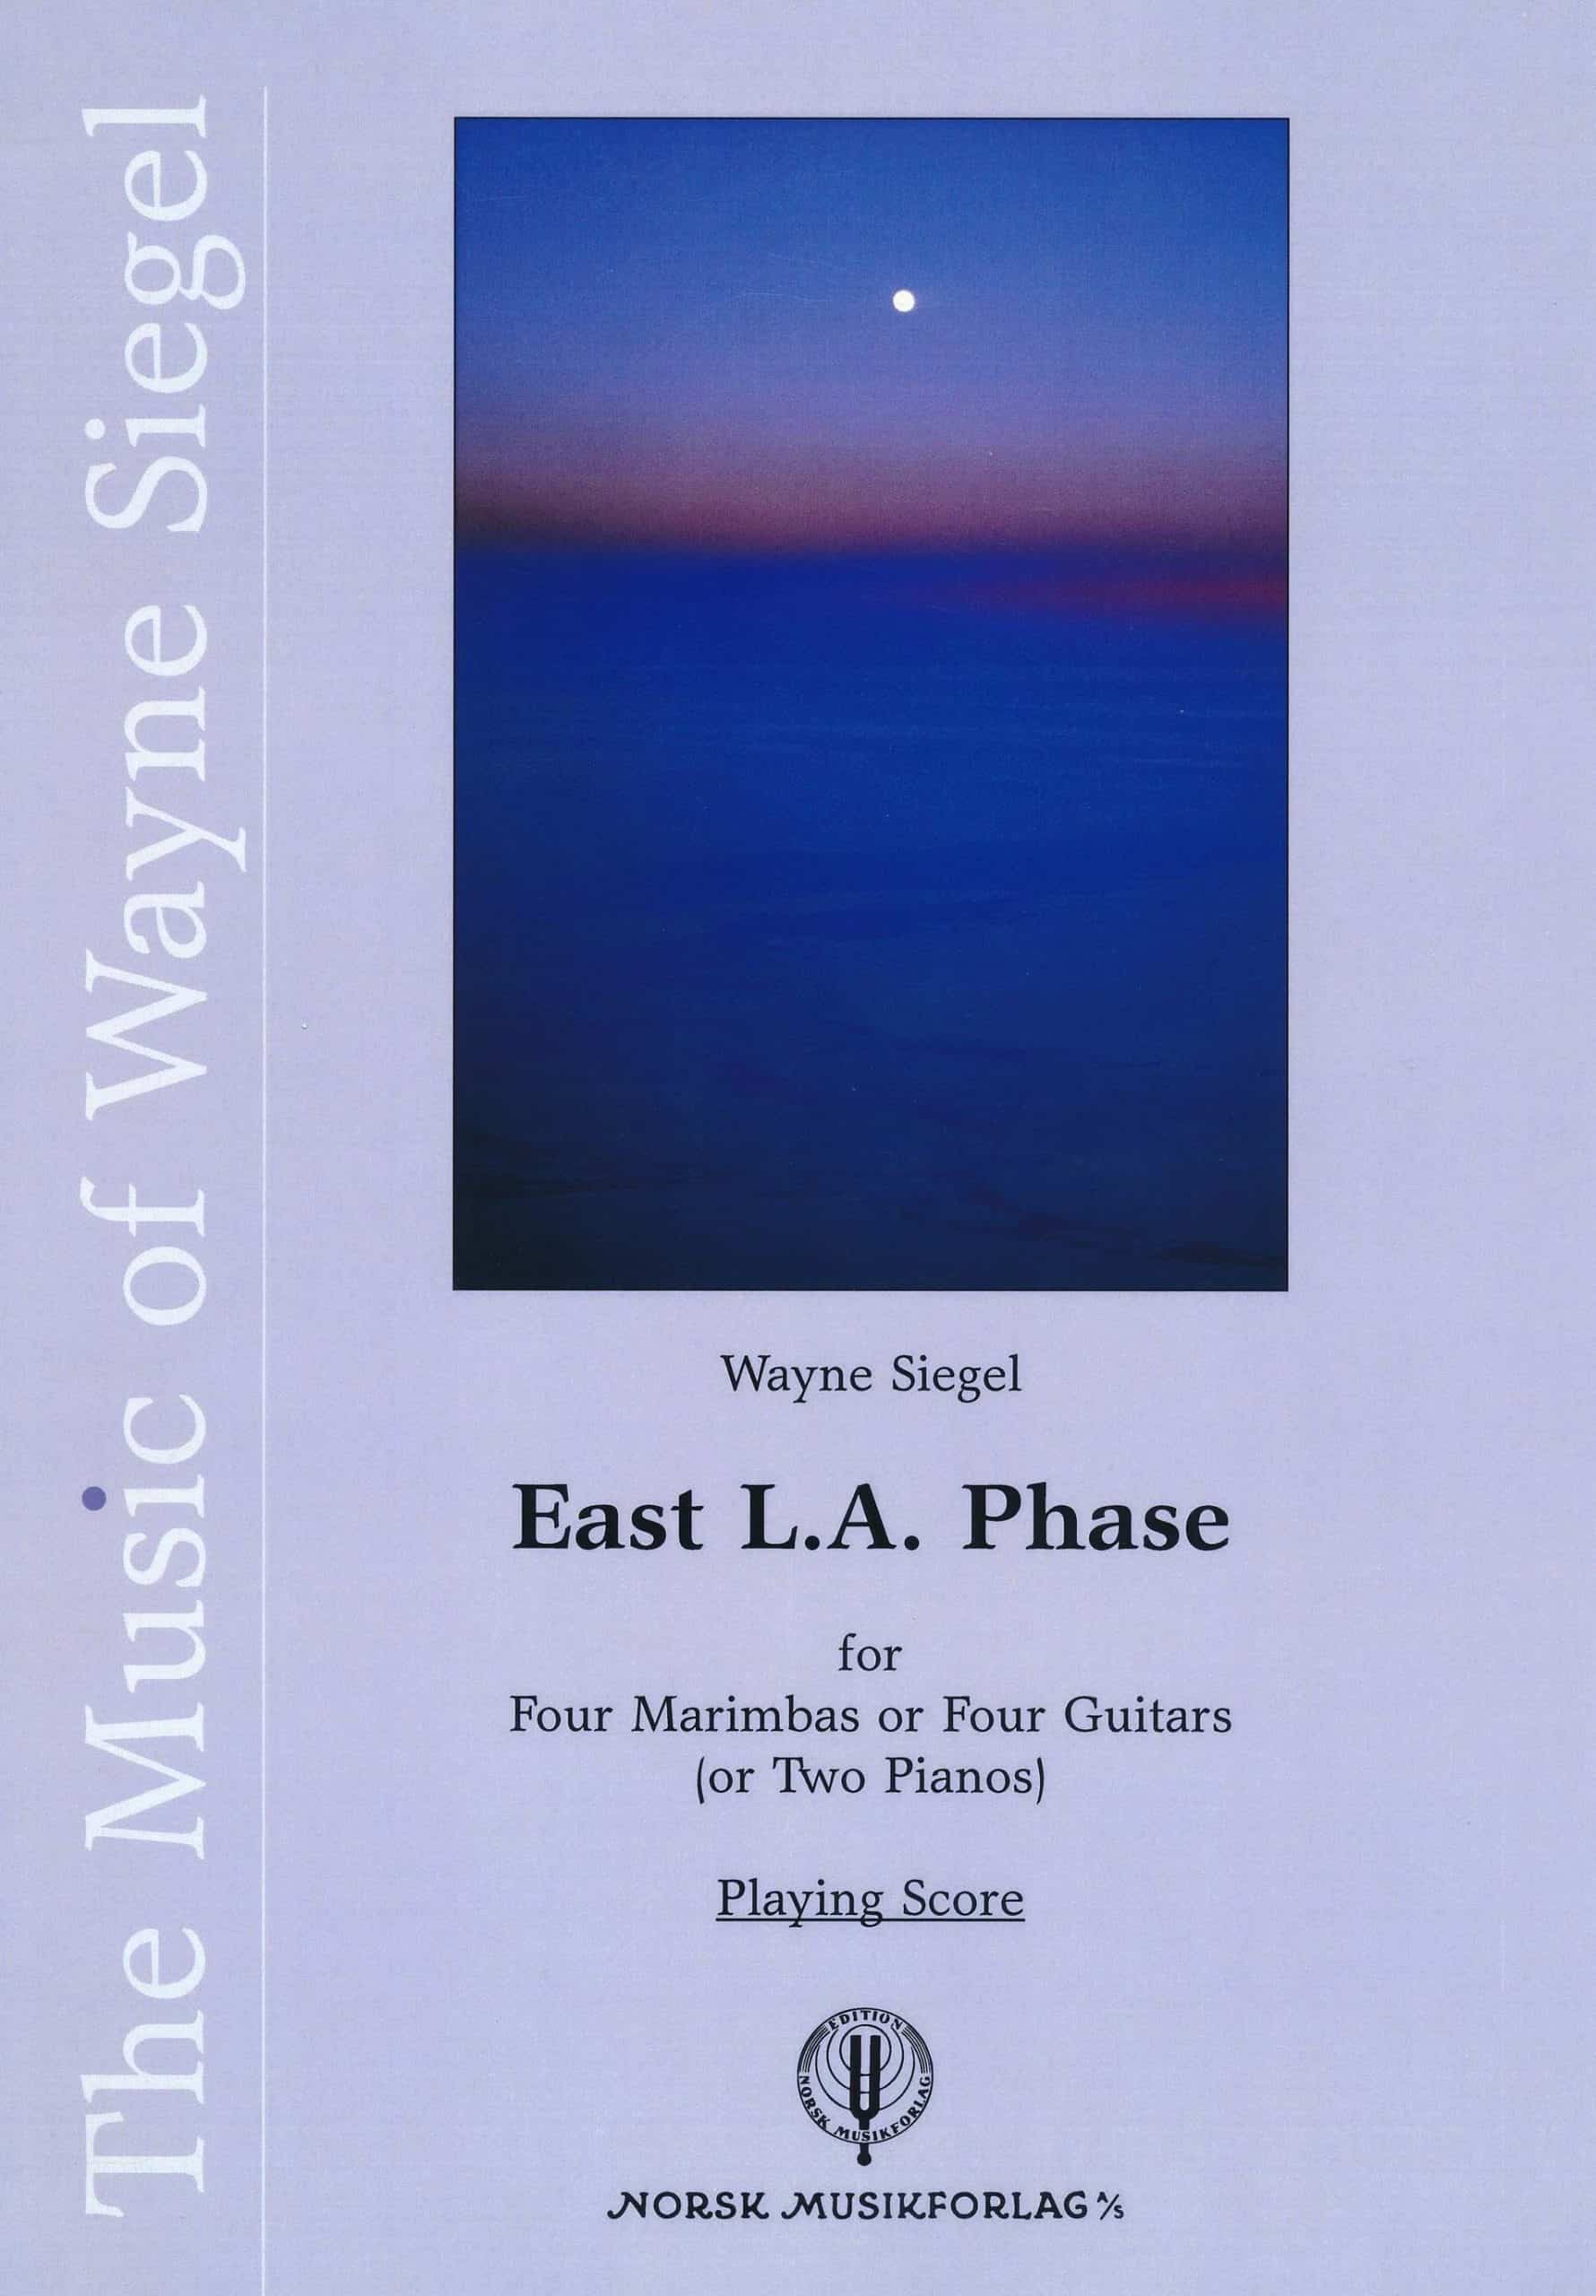 East L.A. Phase